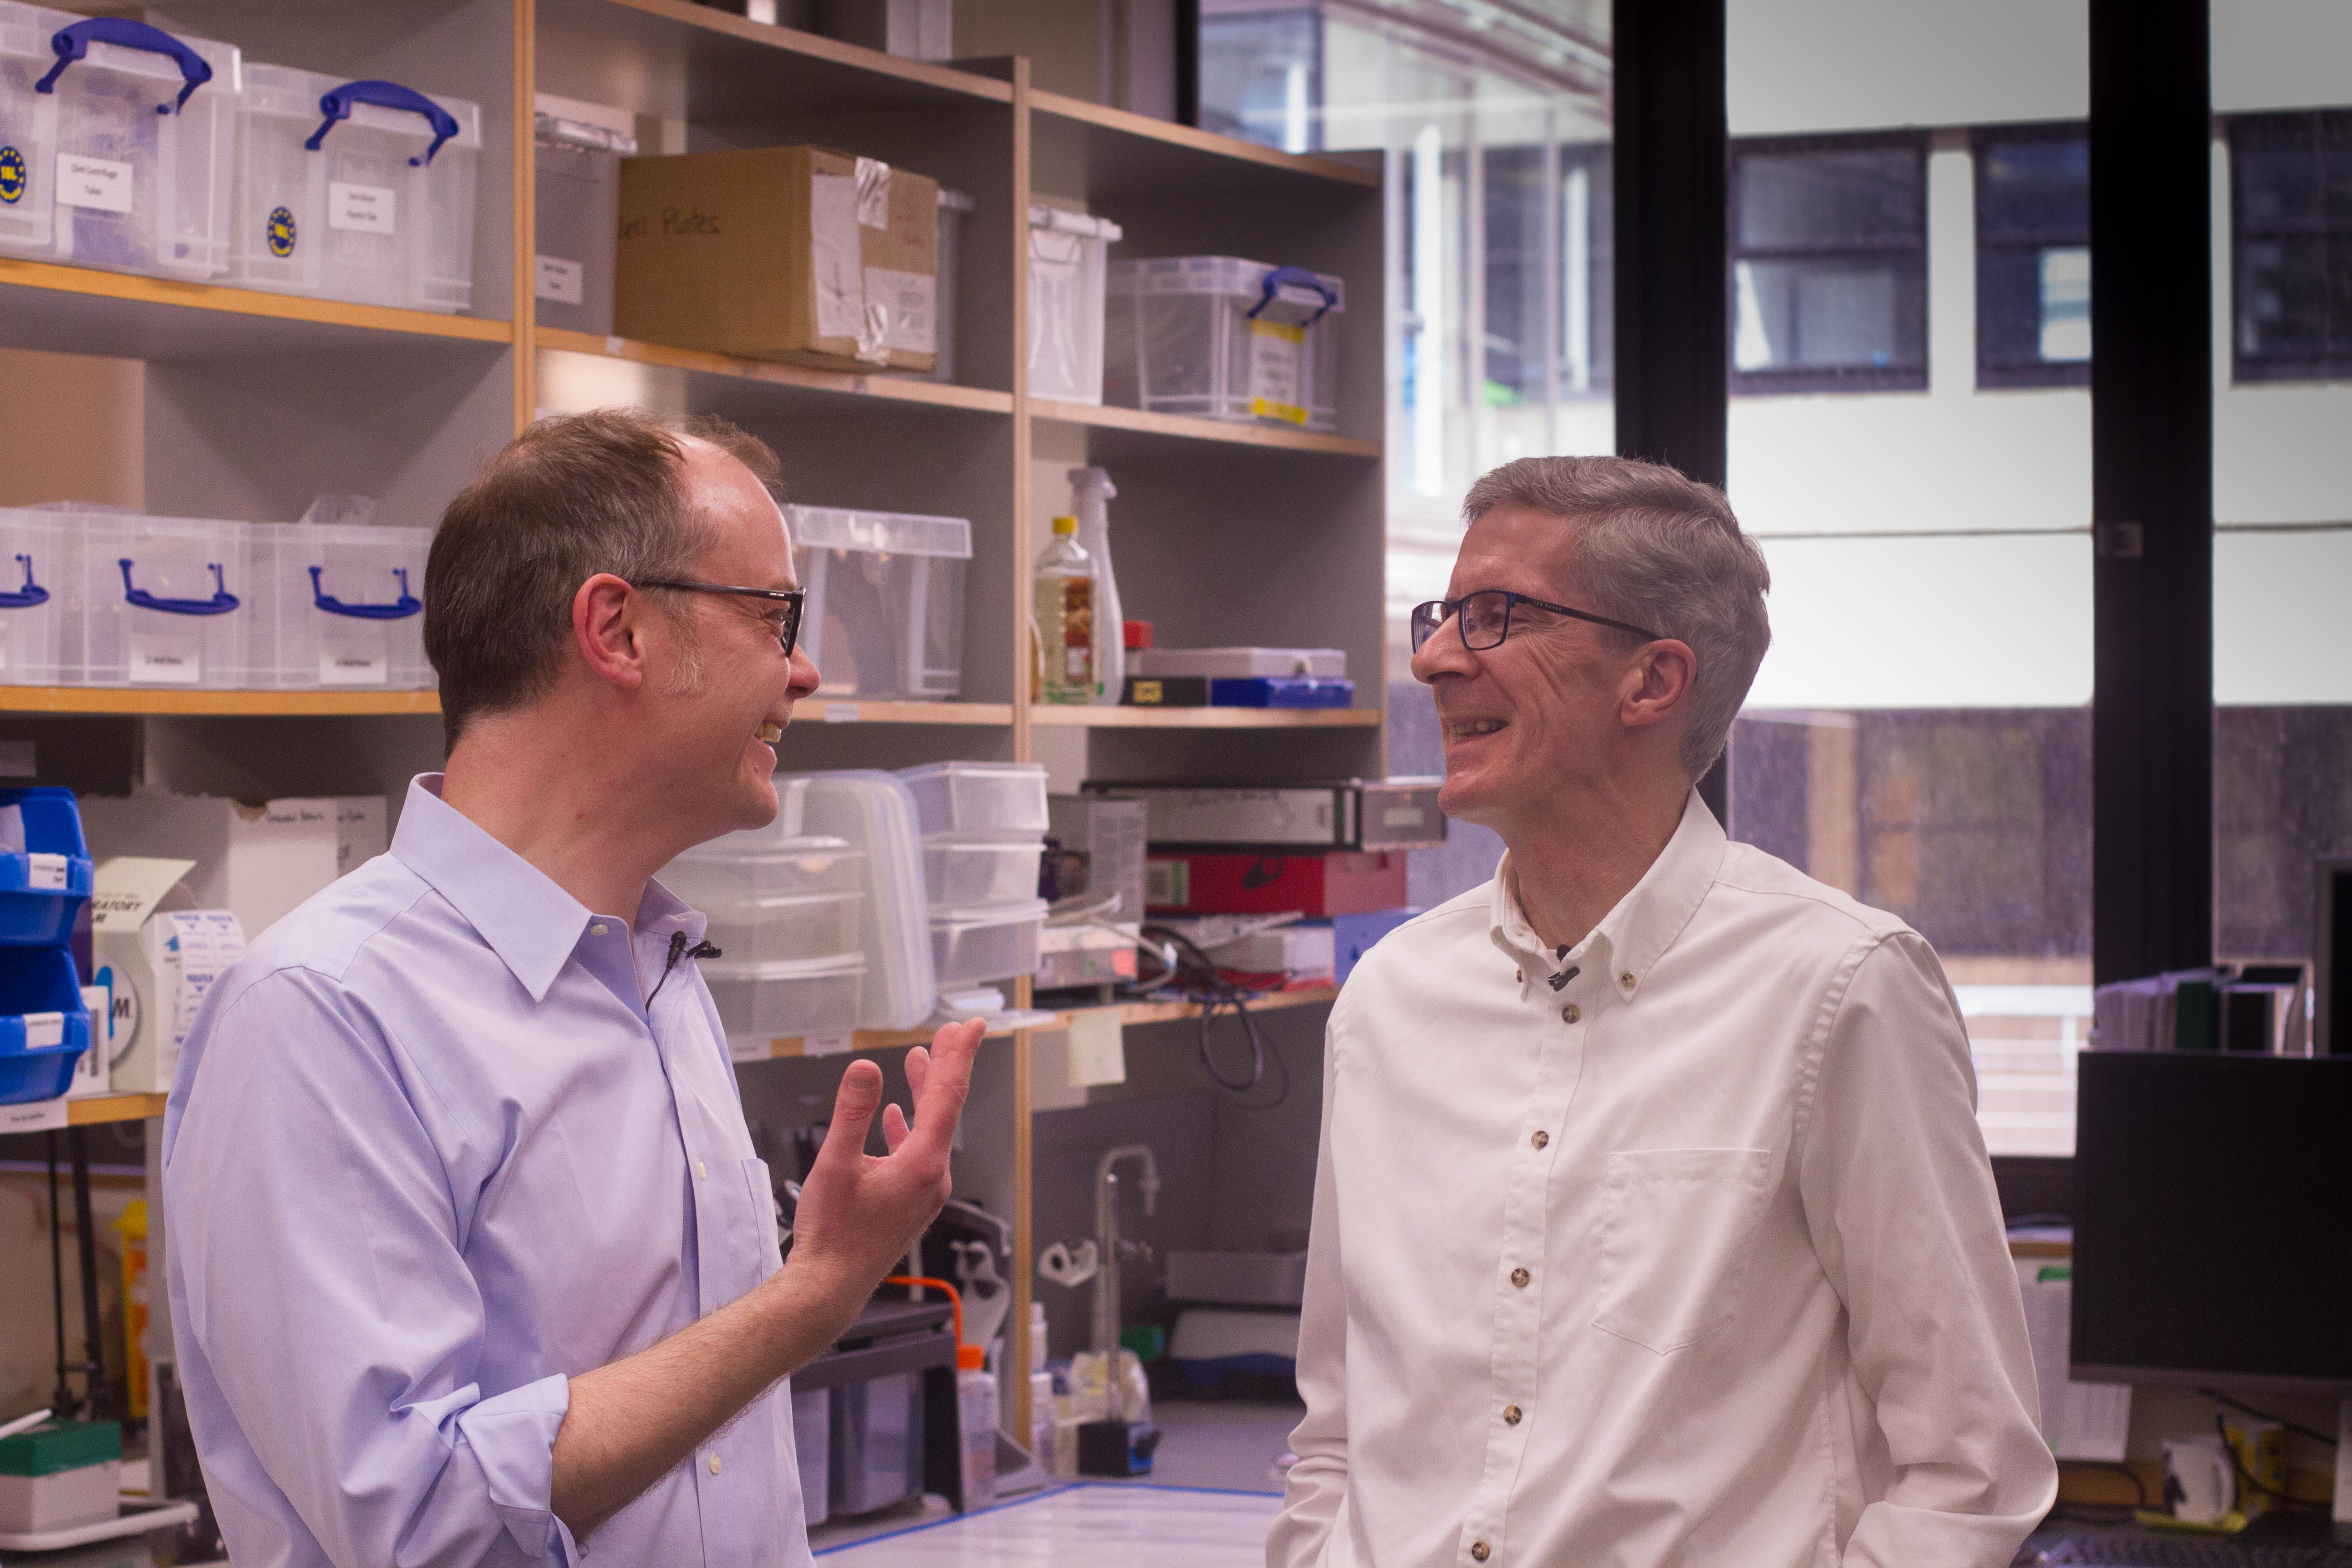 Unit scientist Peter Magill and Parkinson’s UK member Kevin McFarthing chat in the lab about the MRC BNDU’s research into Parkinson’s disease.